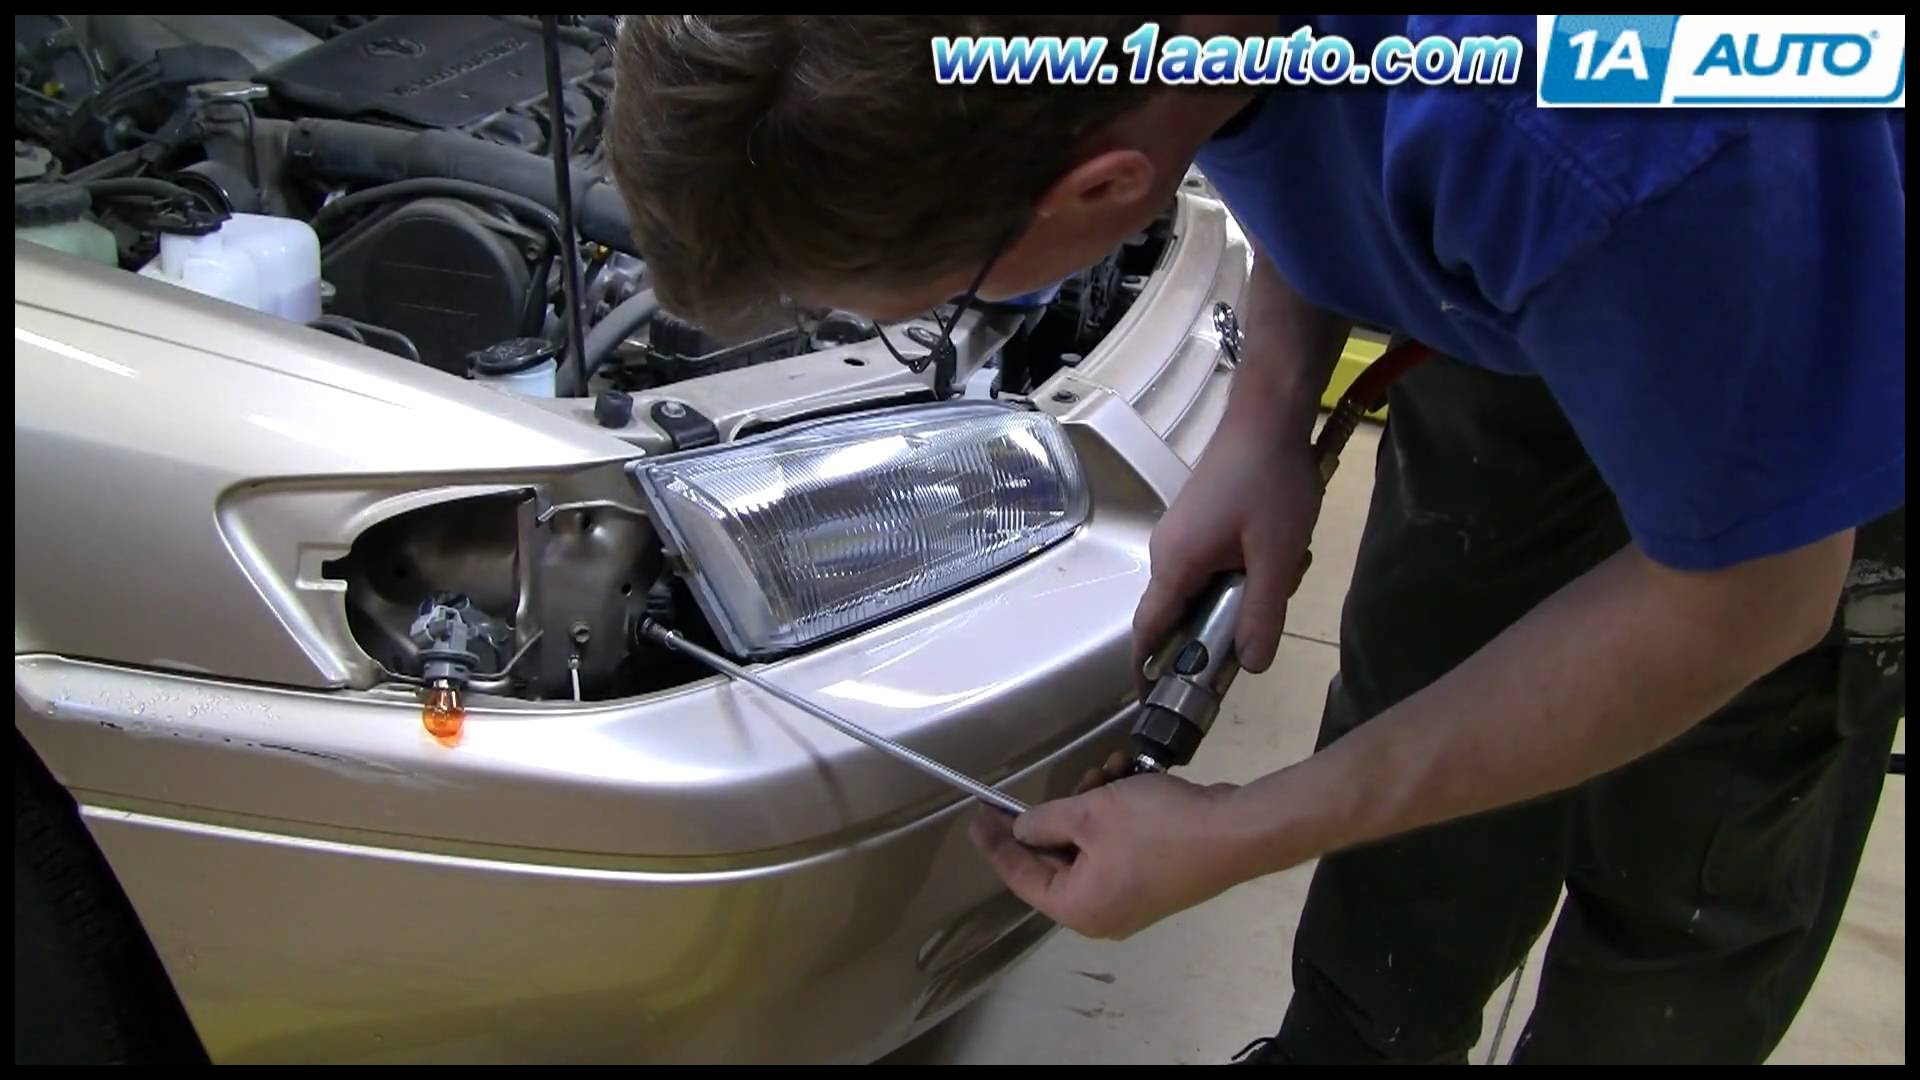 Top How to Install Replace Headlight toyota Camry 97 01 1aauto First Drive